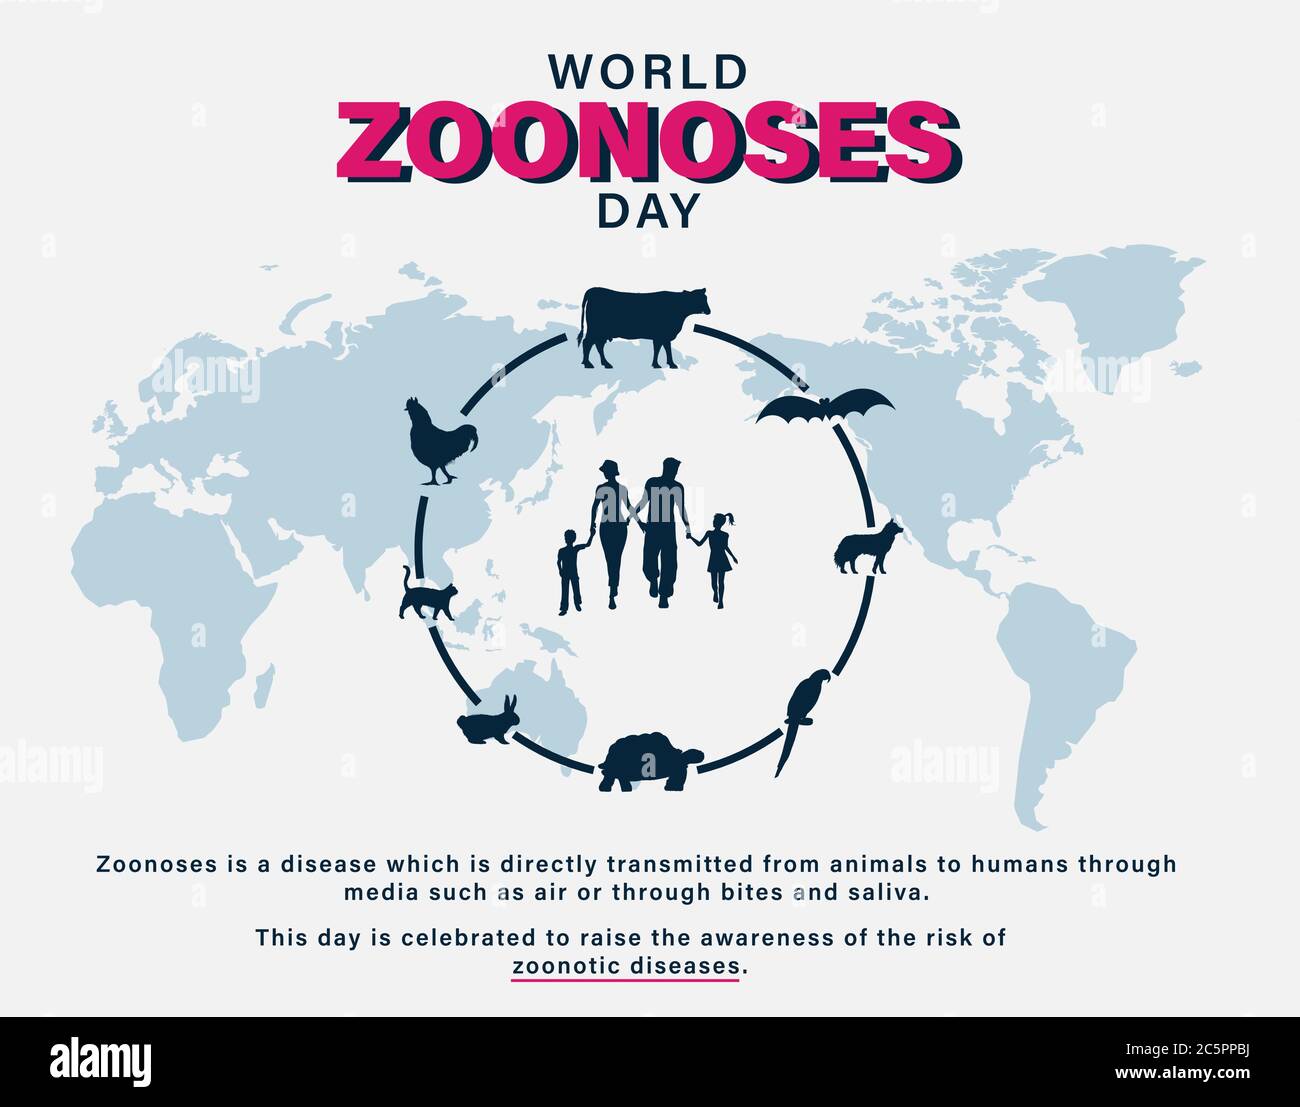 World Zoonoses Day, zoonotic diseases transmissible from animals to humans, celebration infographics, poster, background illustration vector Stock Vector